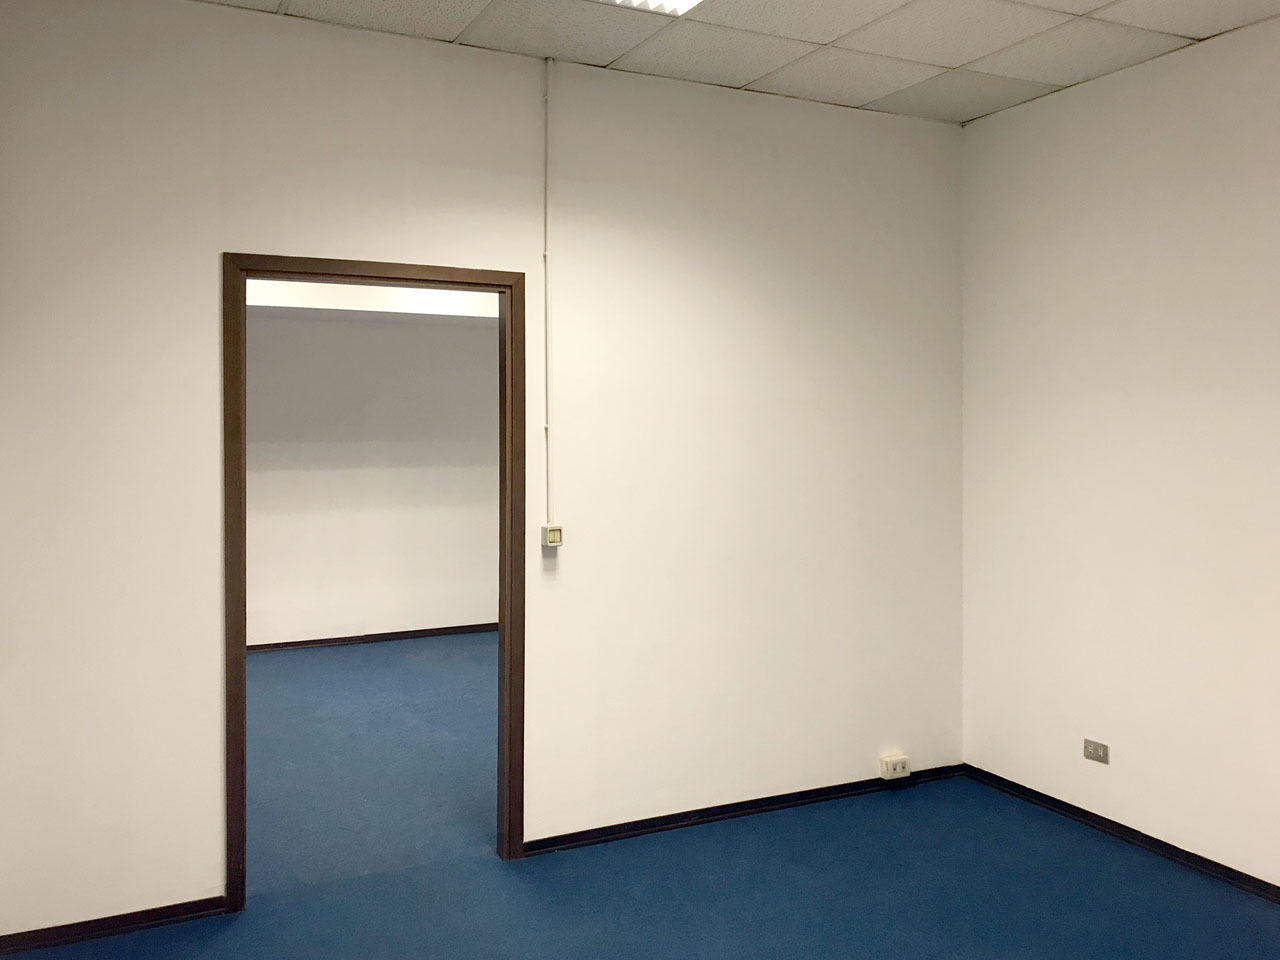 Space 2 - Warehouse for rent in Milan - 100 sqm (1076 sqft) - Atlantic Business Center